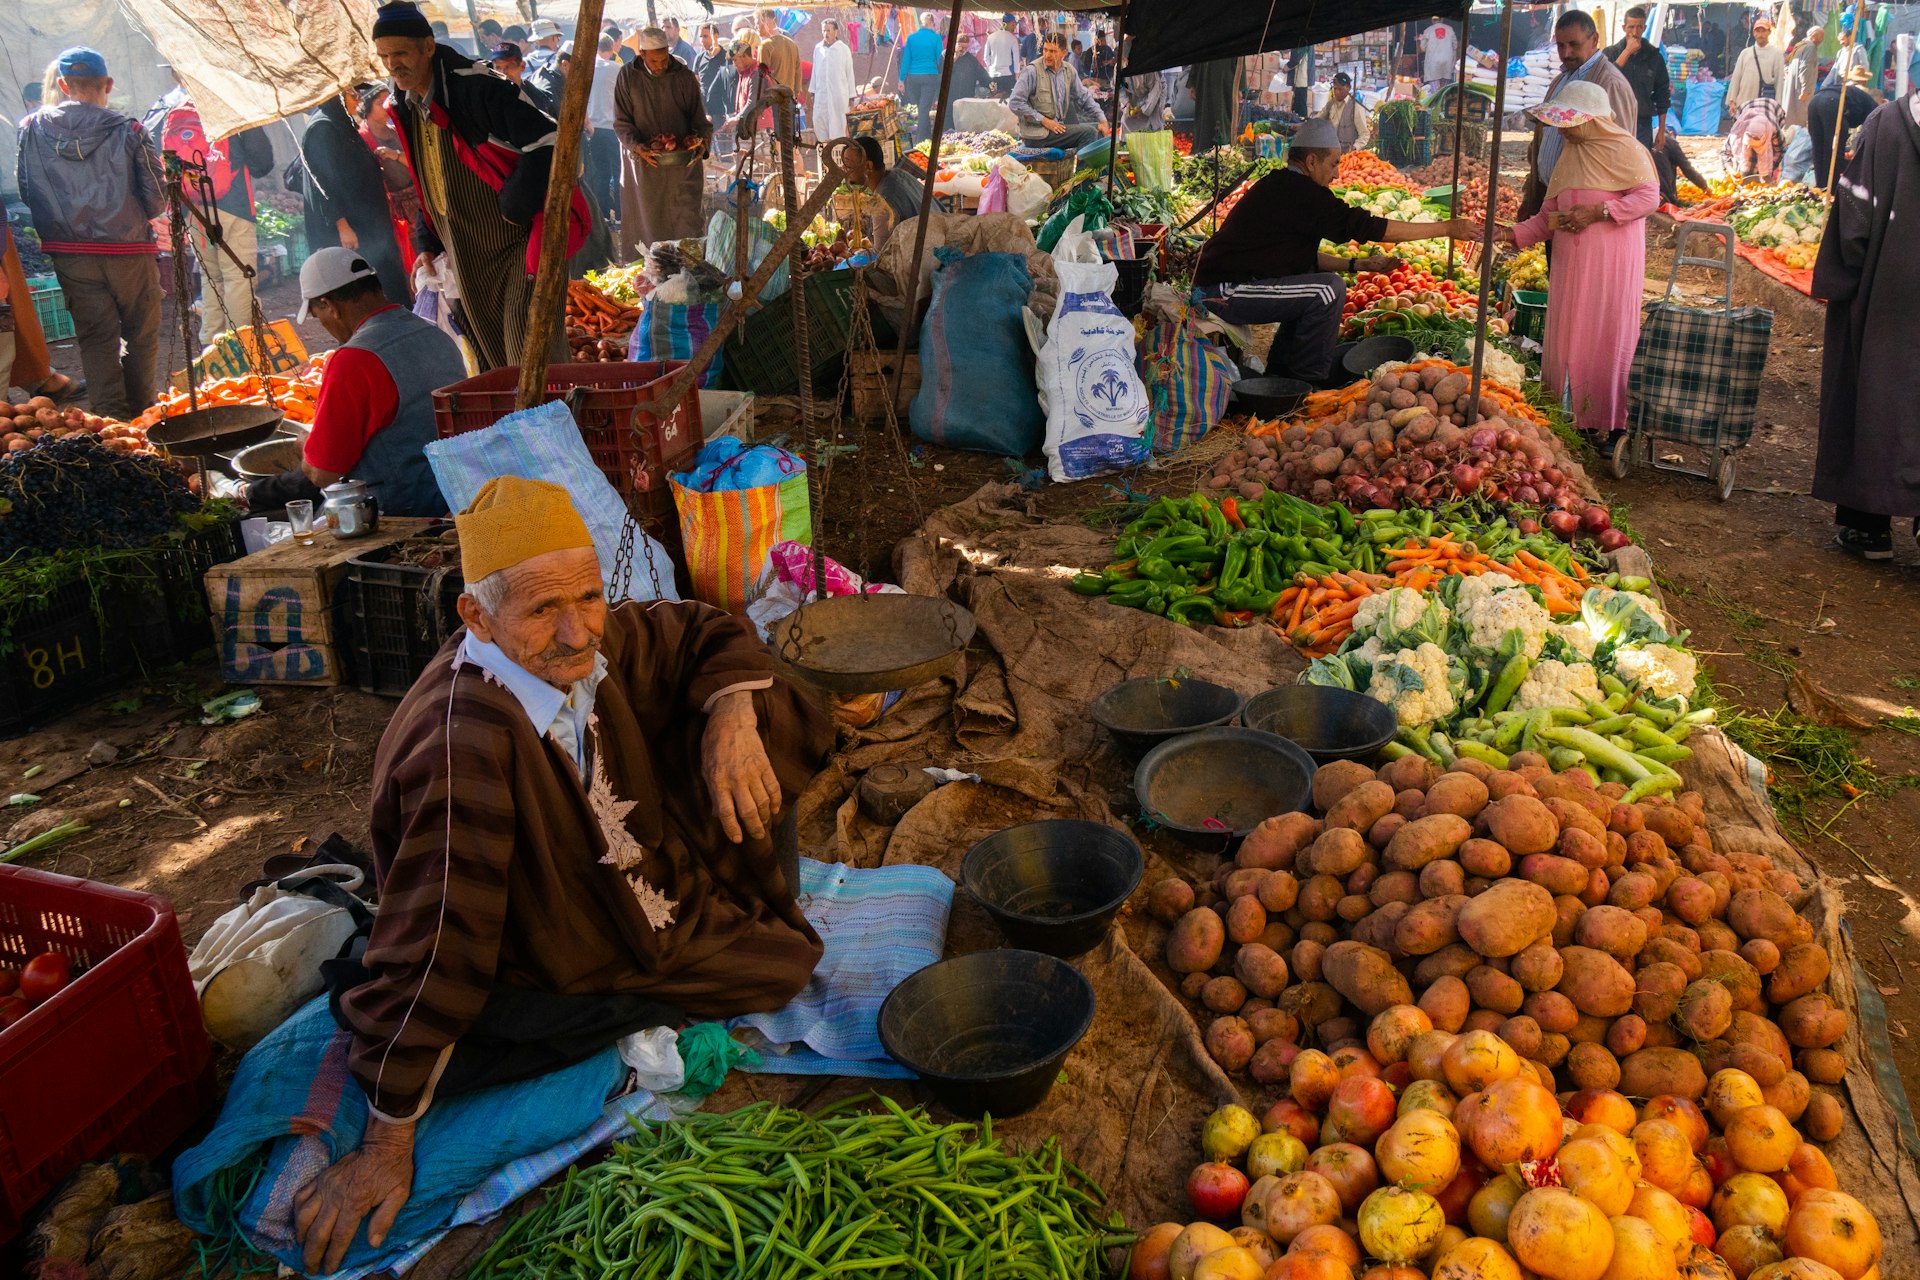 Vegetable seller at the the Saturday weekly market, Asni, High Atlas, Morocco